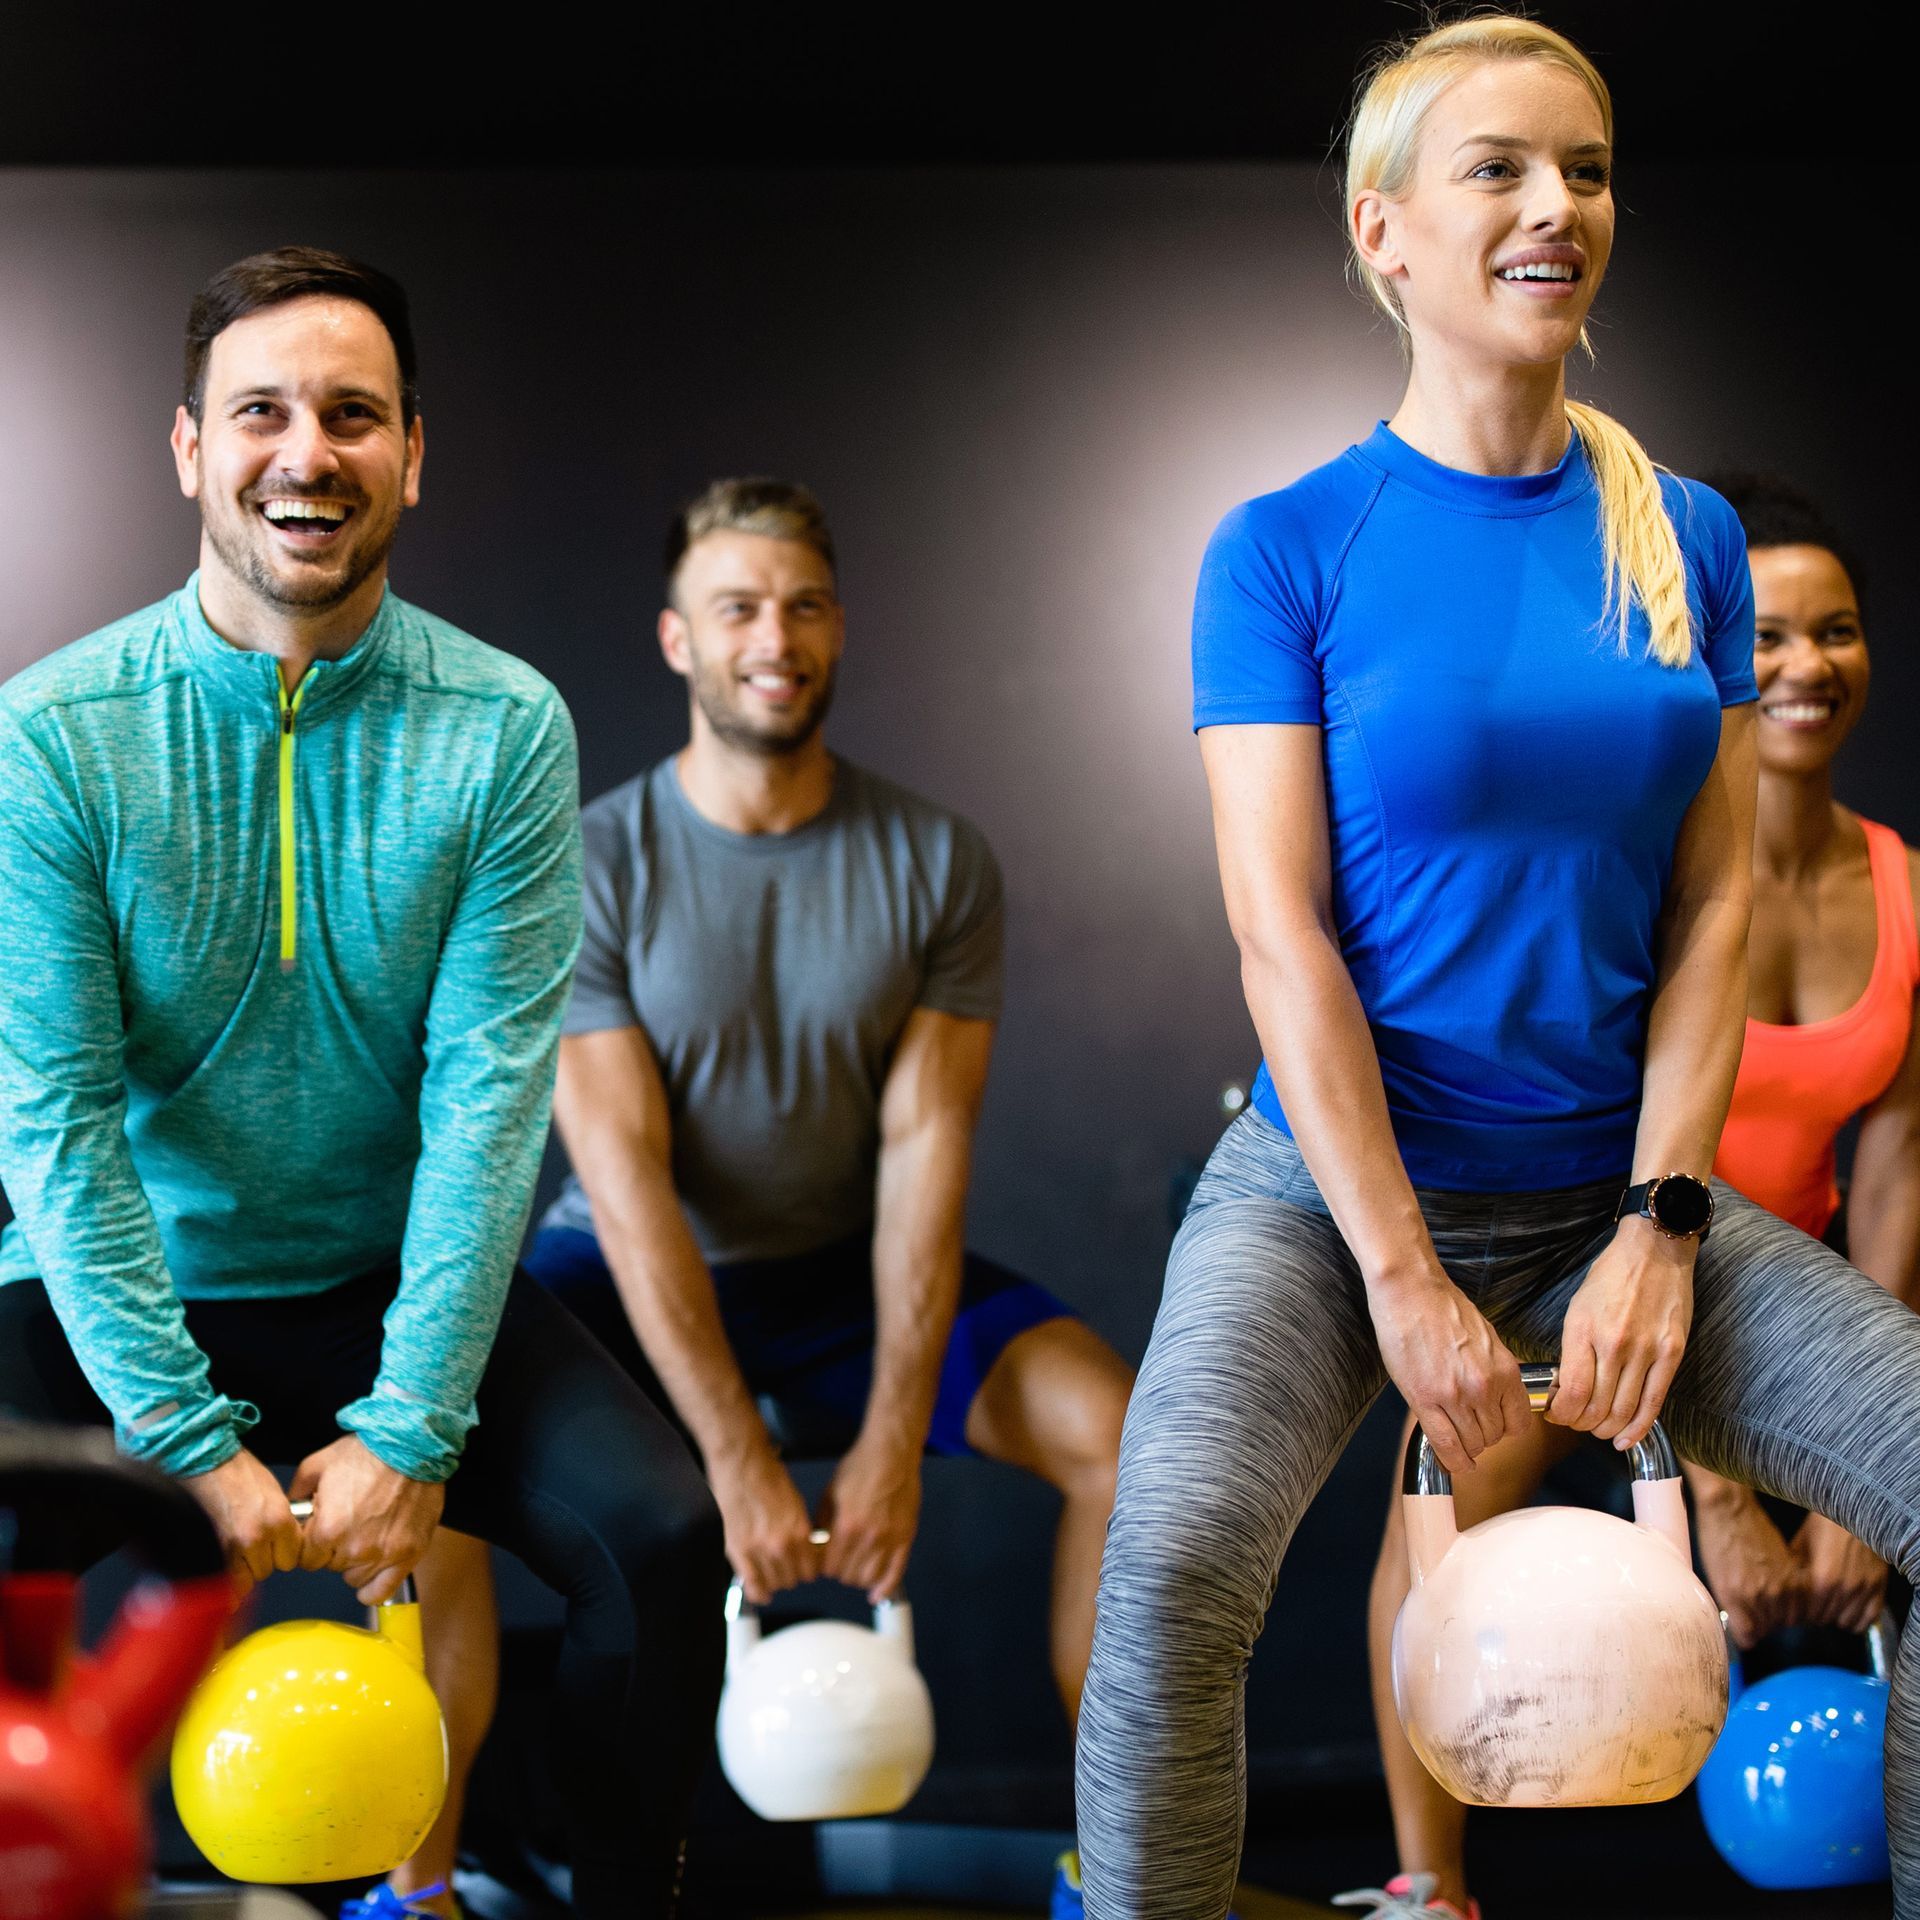 A group of people are squatting with kettlebells in a gym.